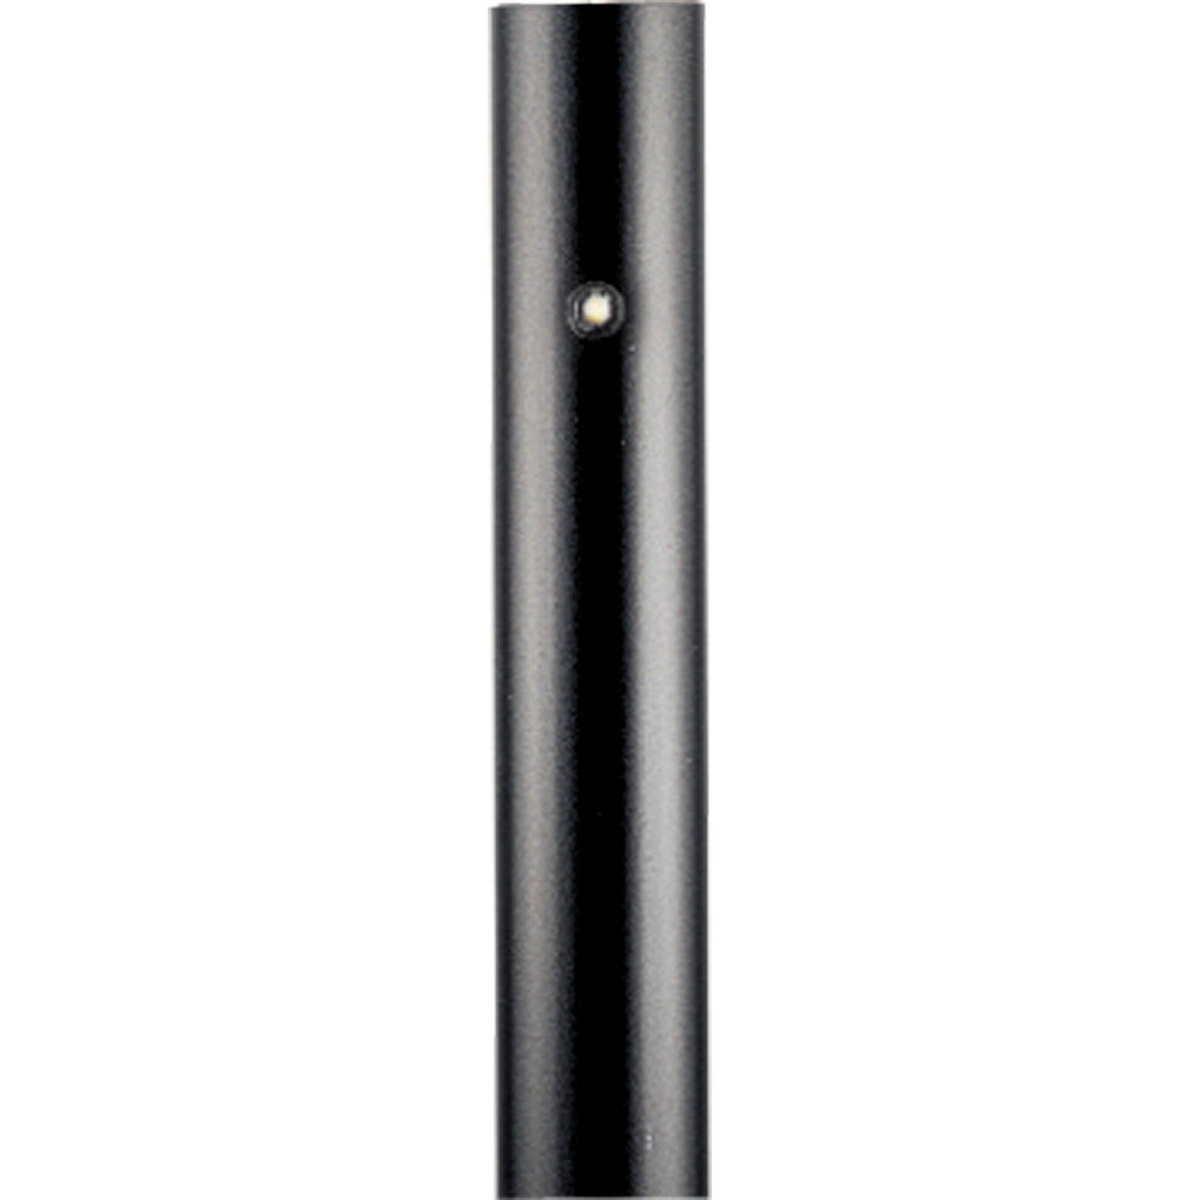 Illuminate your home with this remarkable black finished post. Aluminum post with photocell.